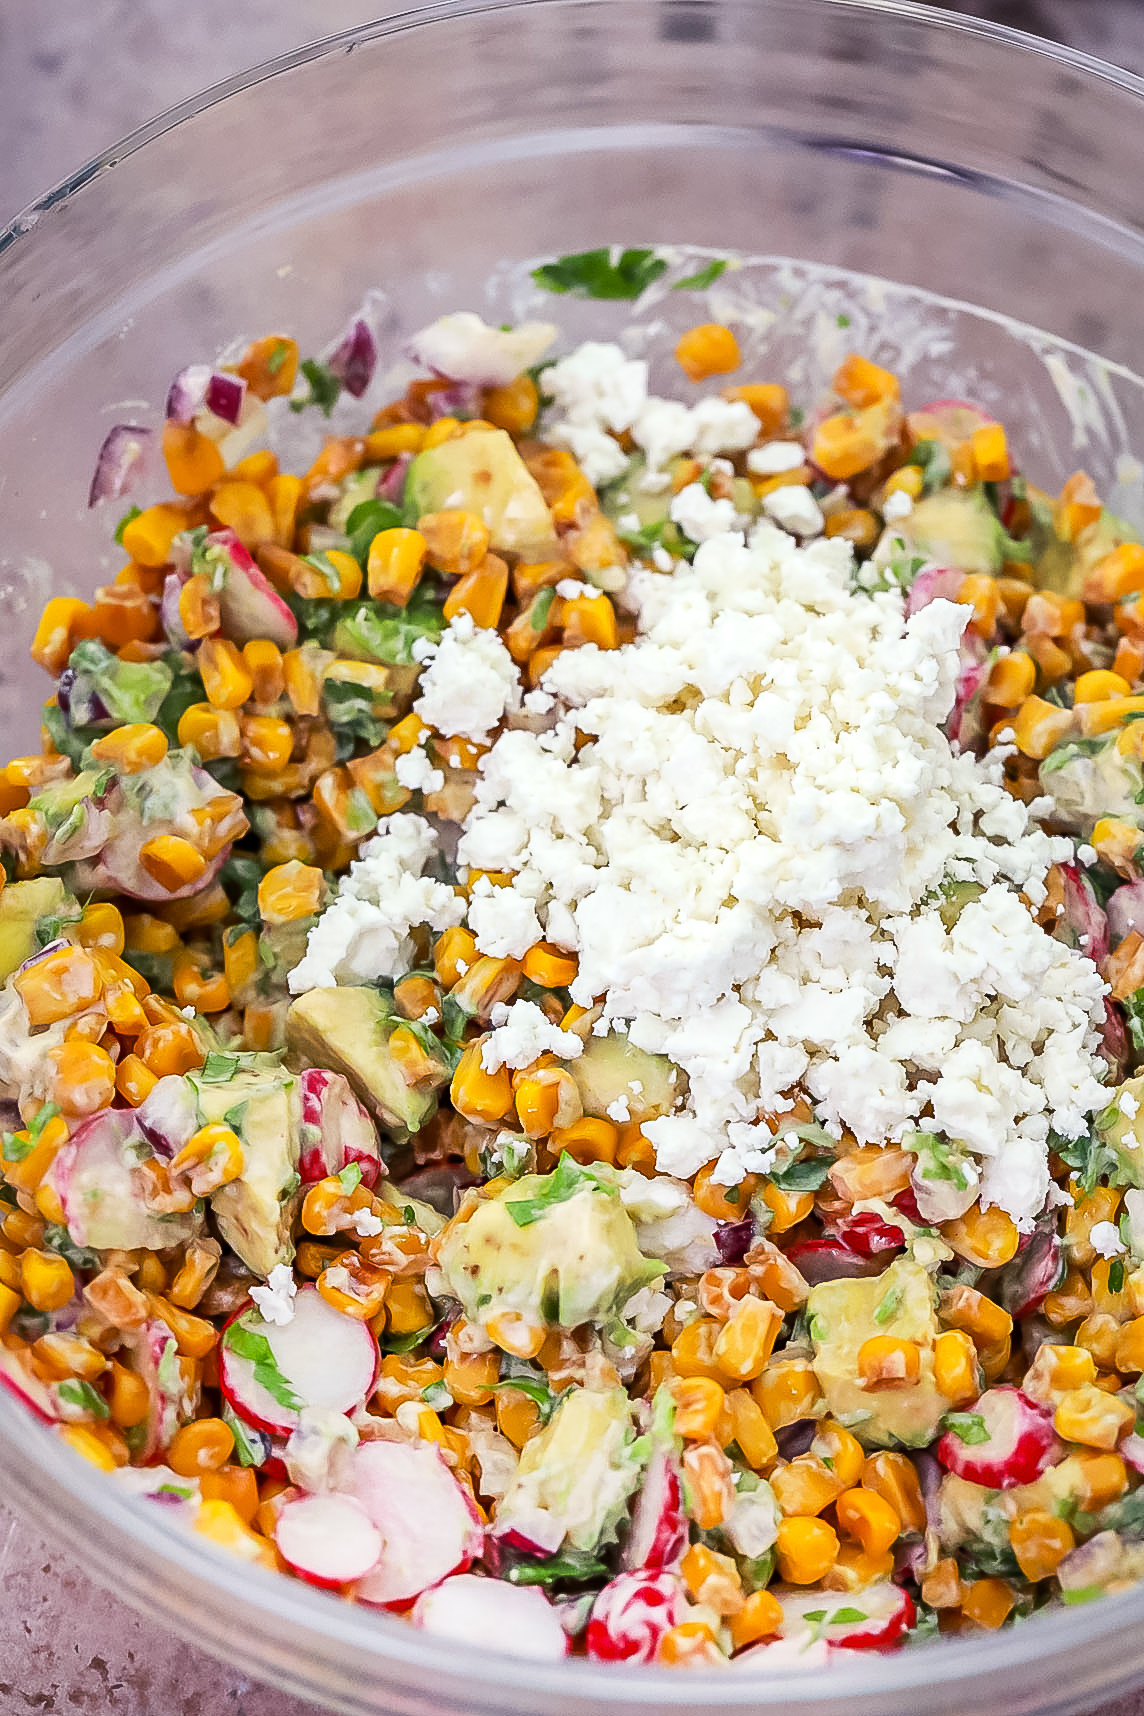 Cotija cheese added to the corn salad.